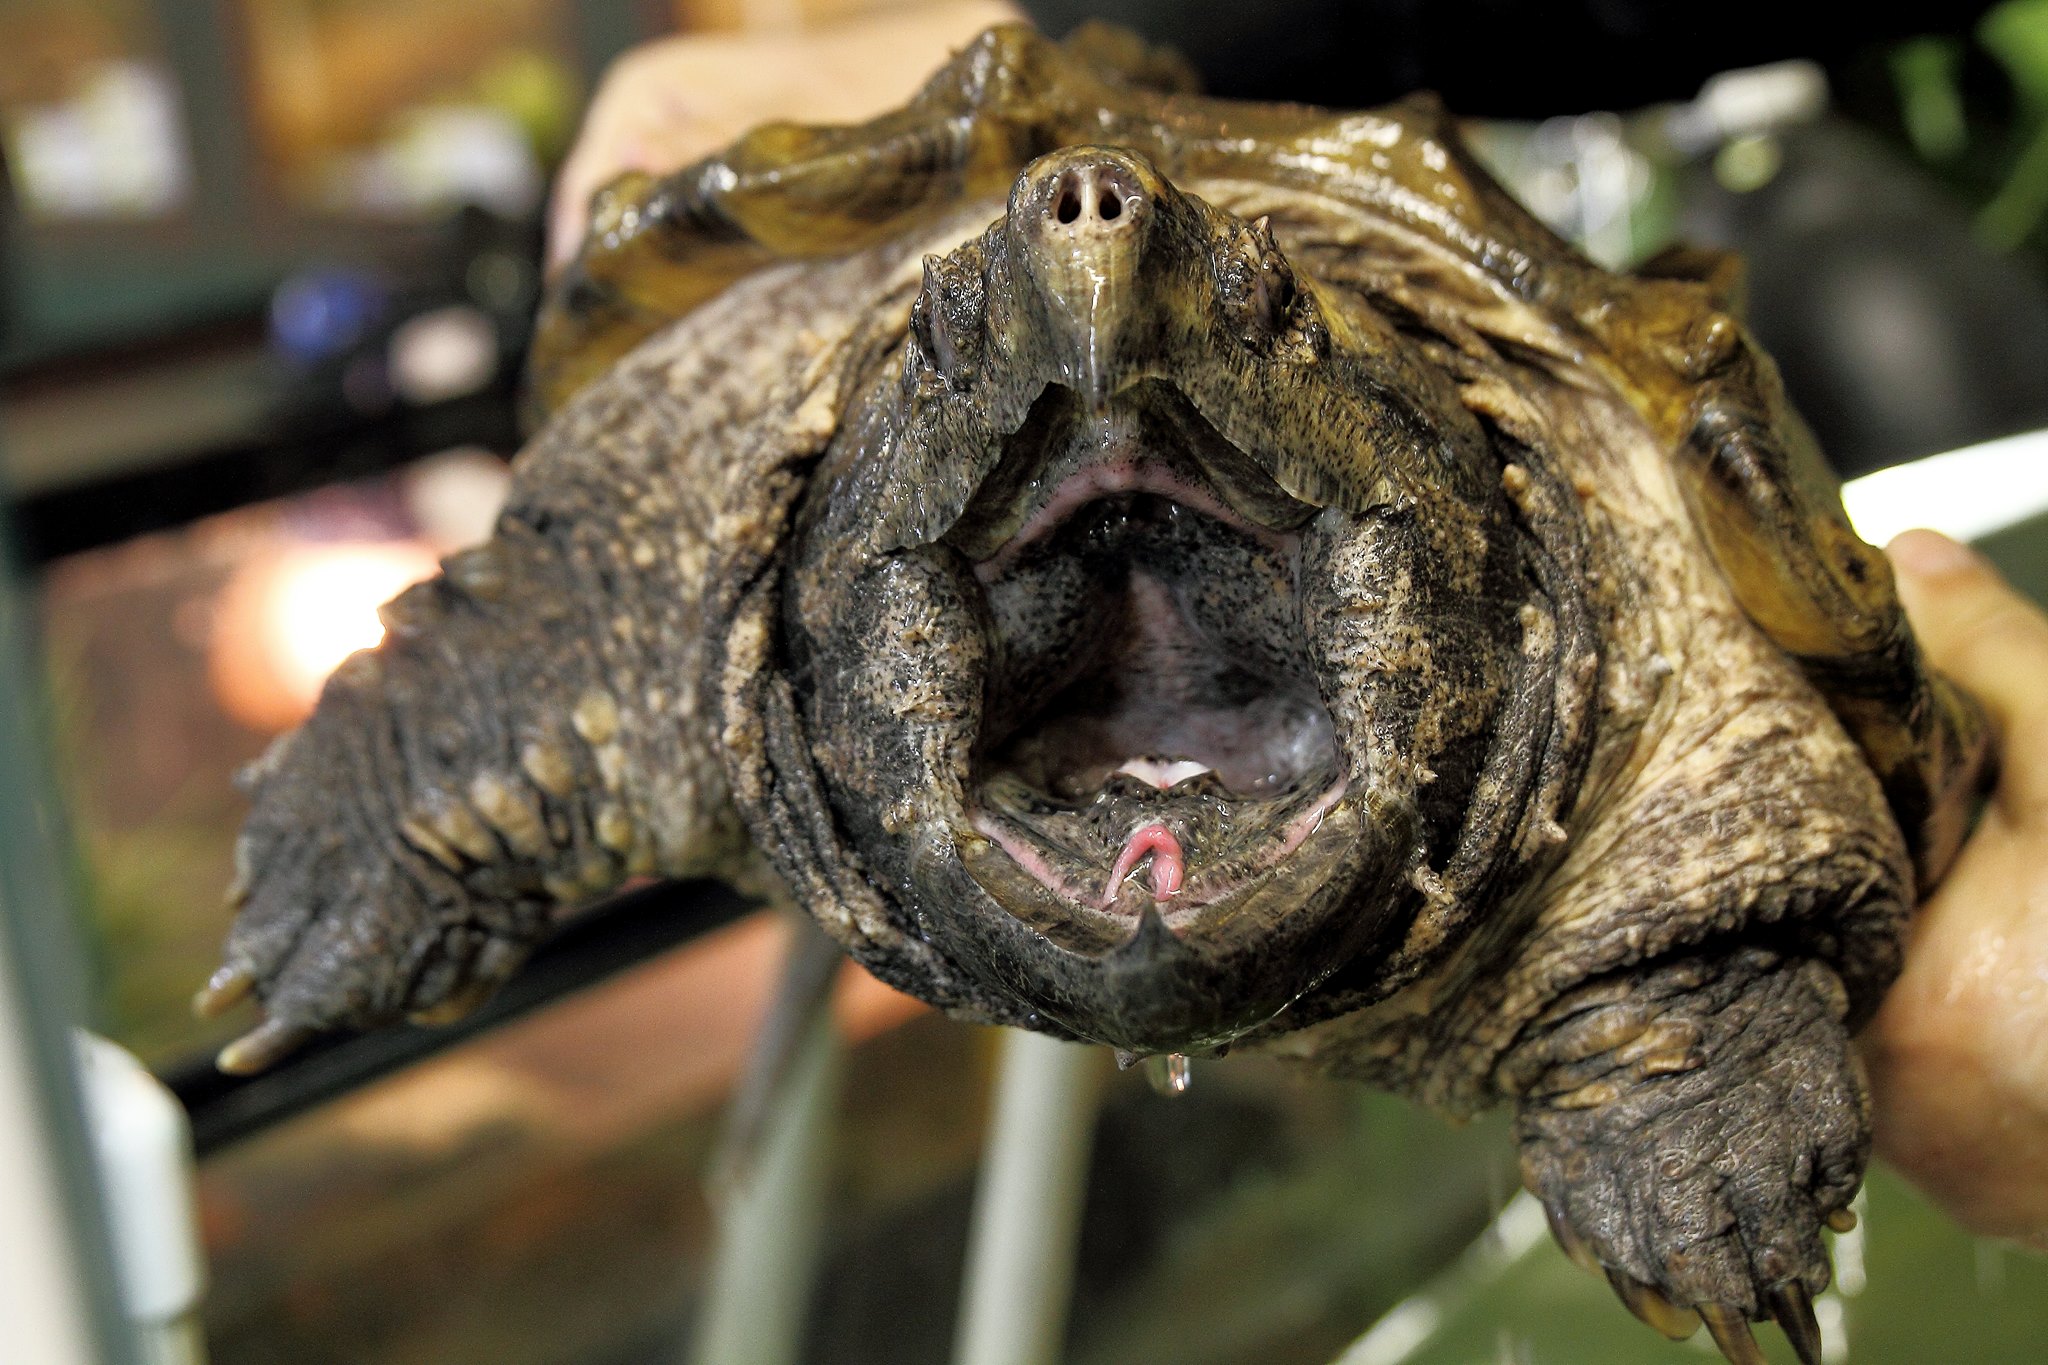 Vancouver, Jason Kenzie, photographer, photography, The Photo Warrior, Snapping Turtle
www.lifethroughmylens.ca